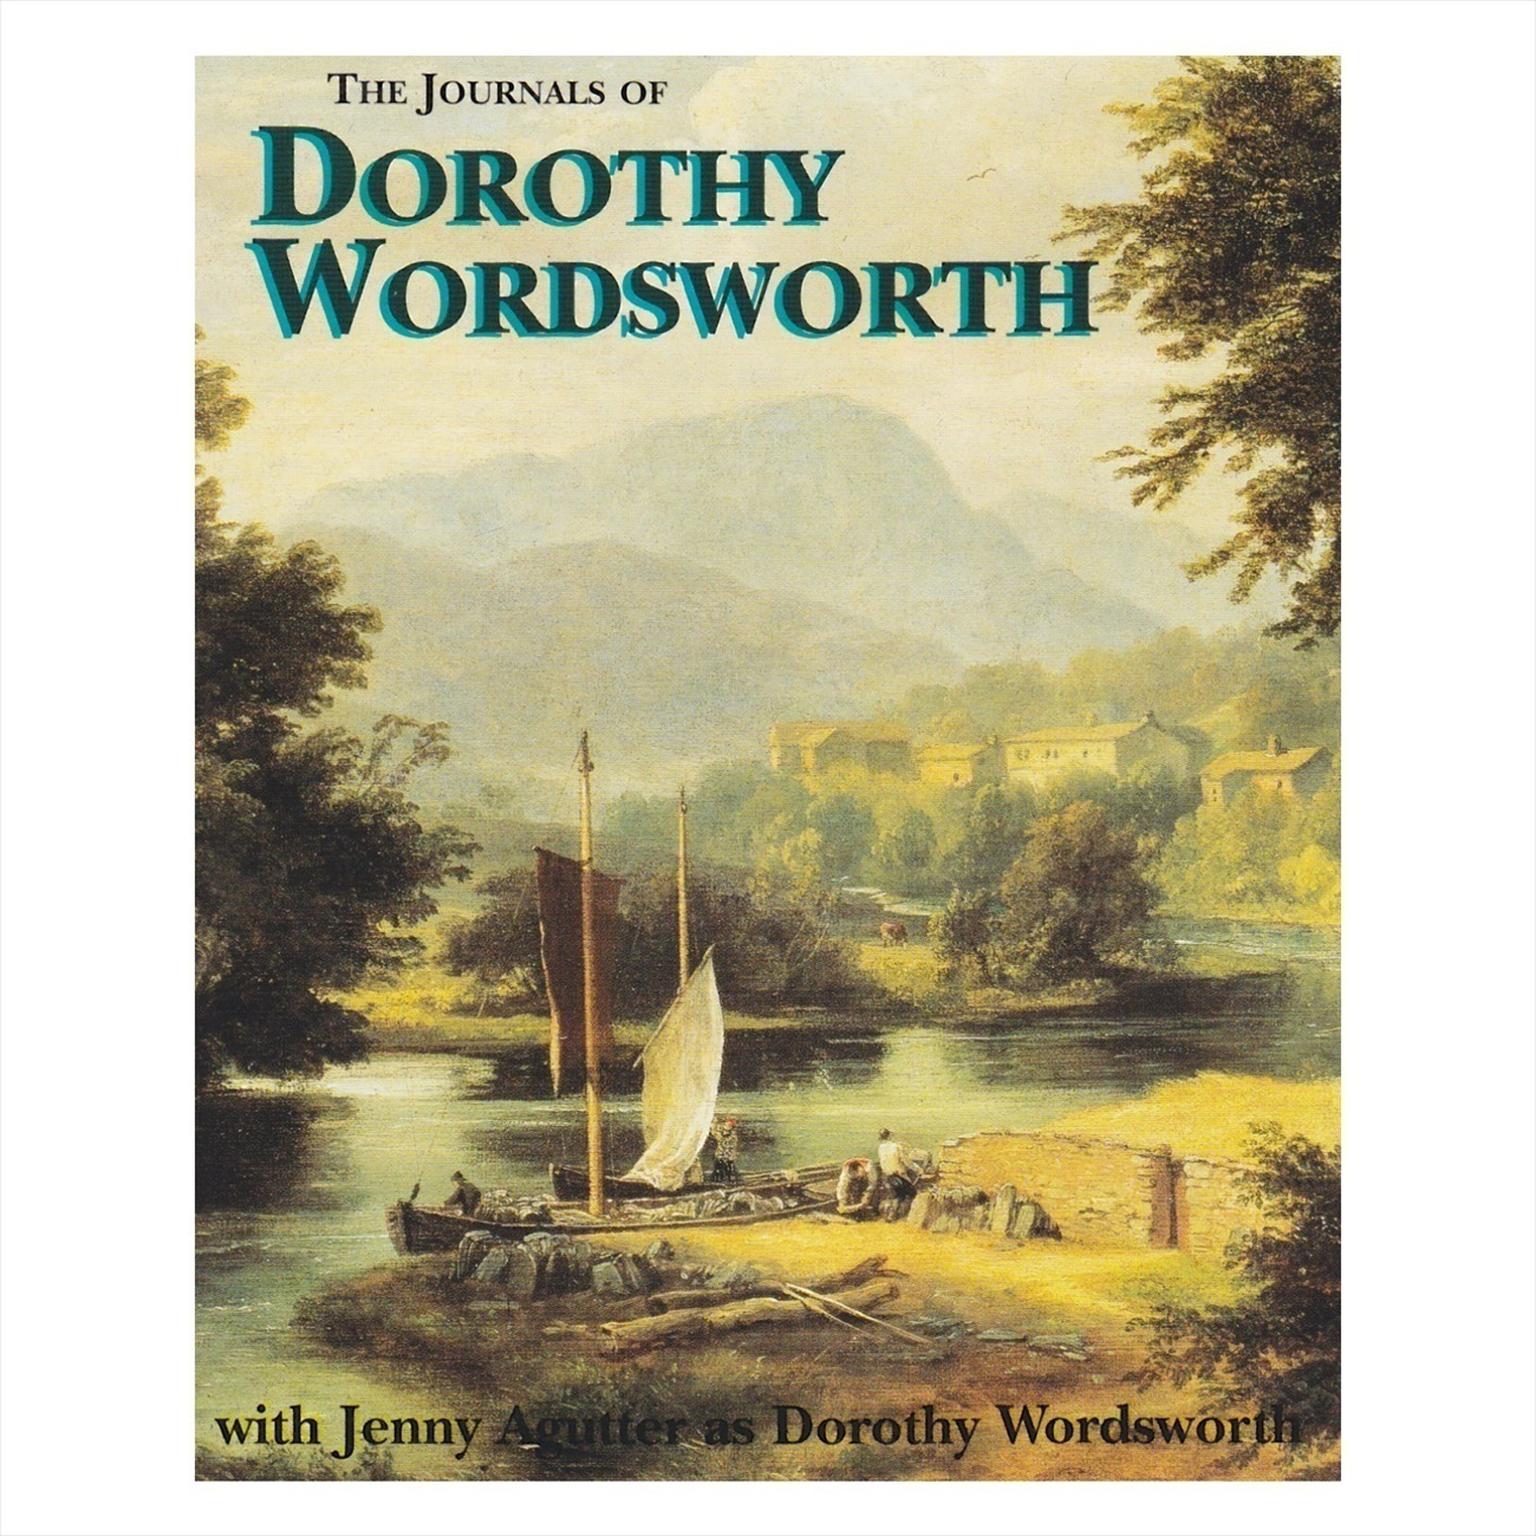 The Journals of Dorothy Wordsworth Audiobook, by Dorothy Wordsworth